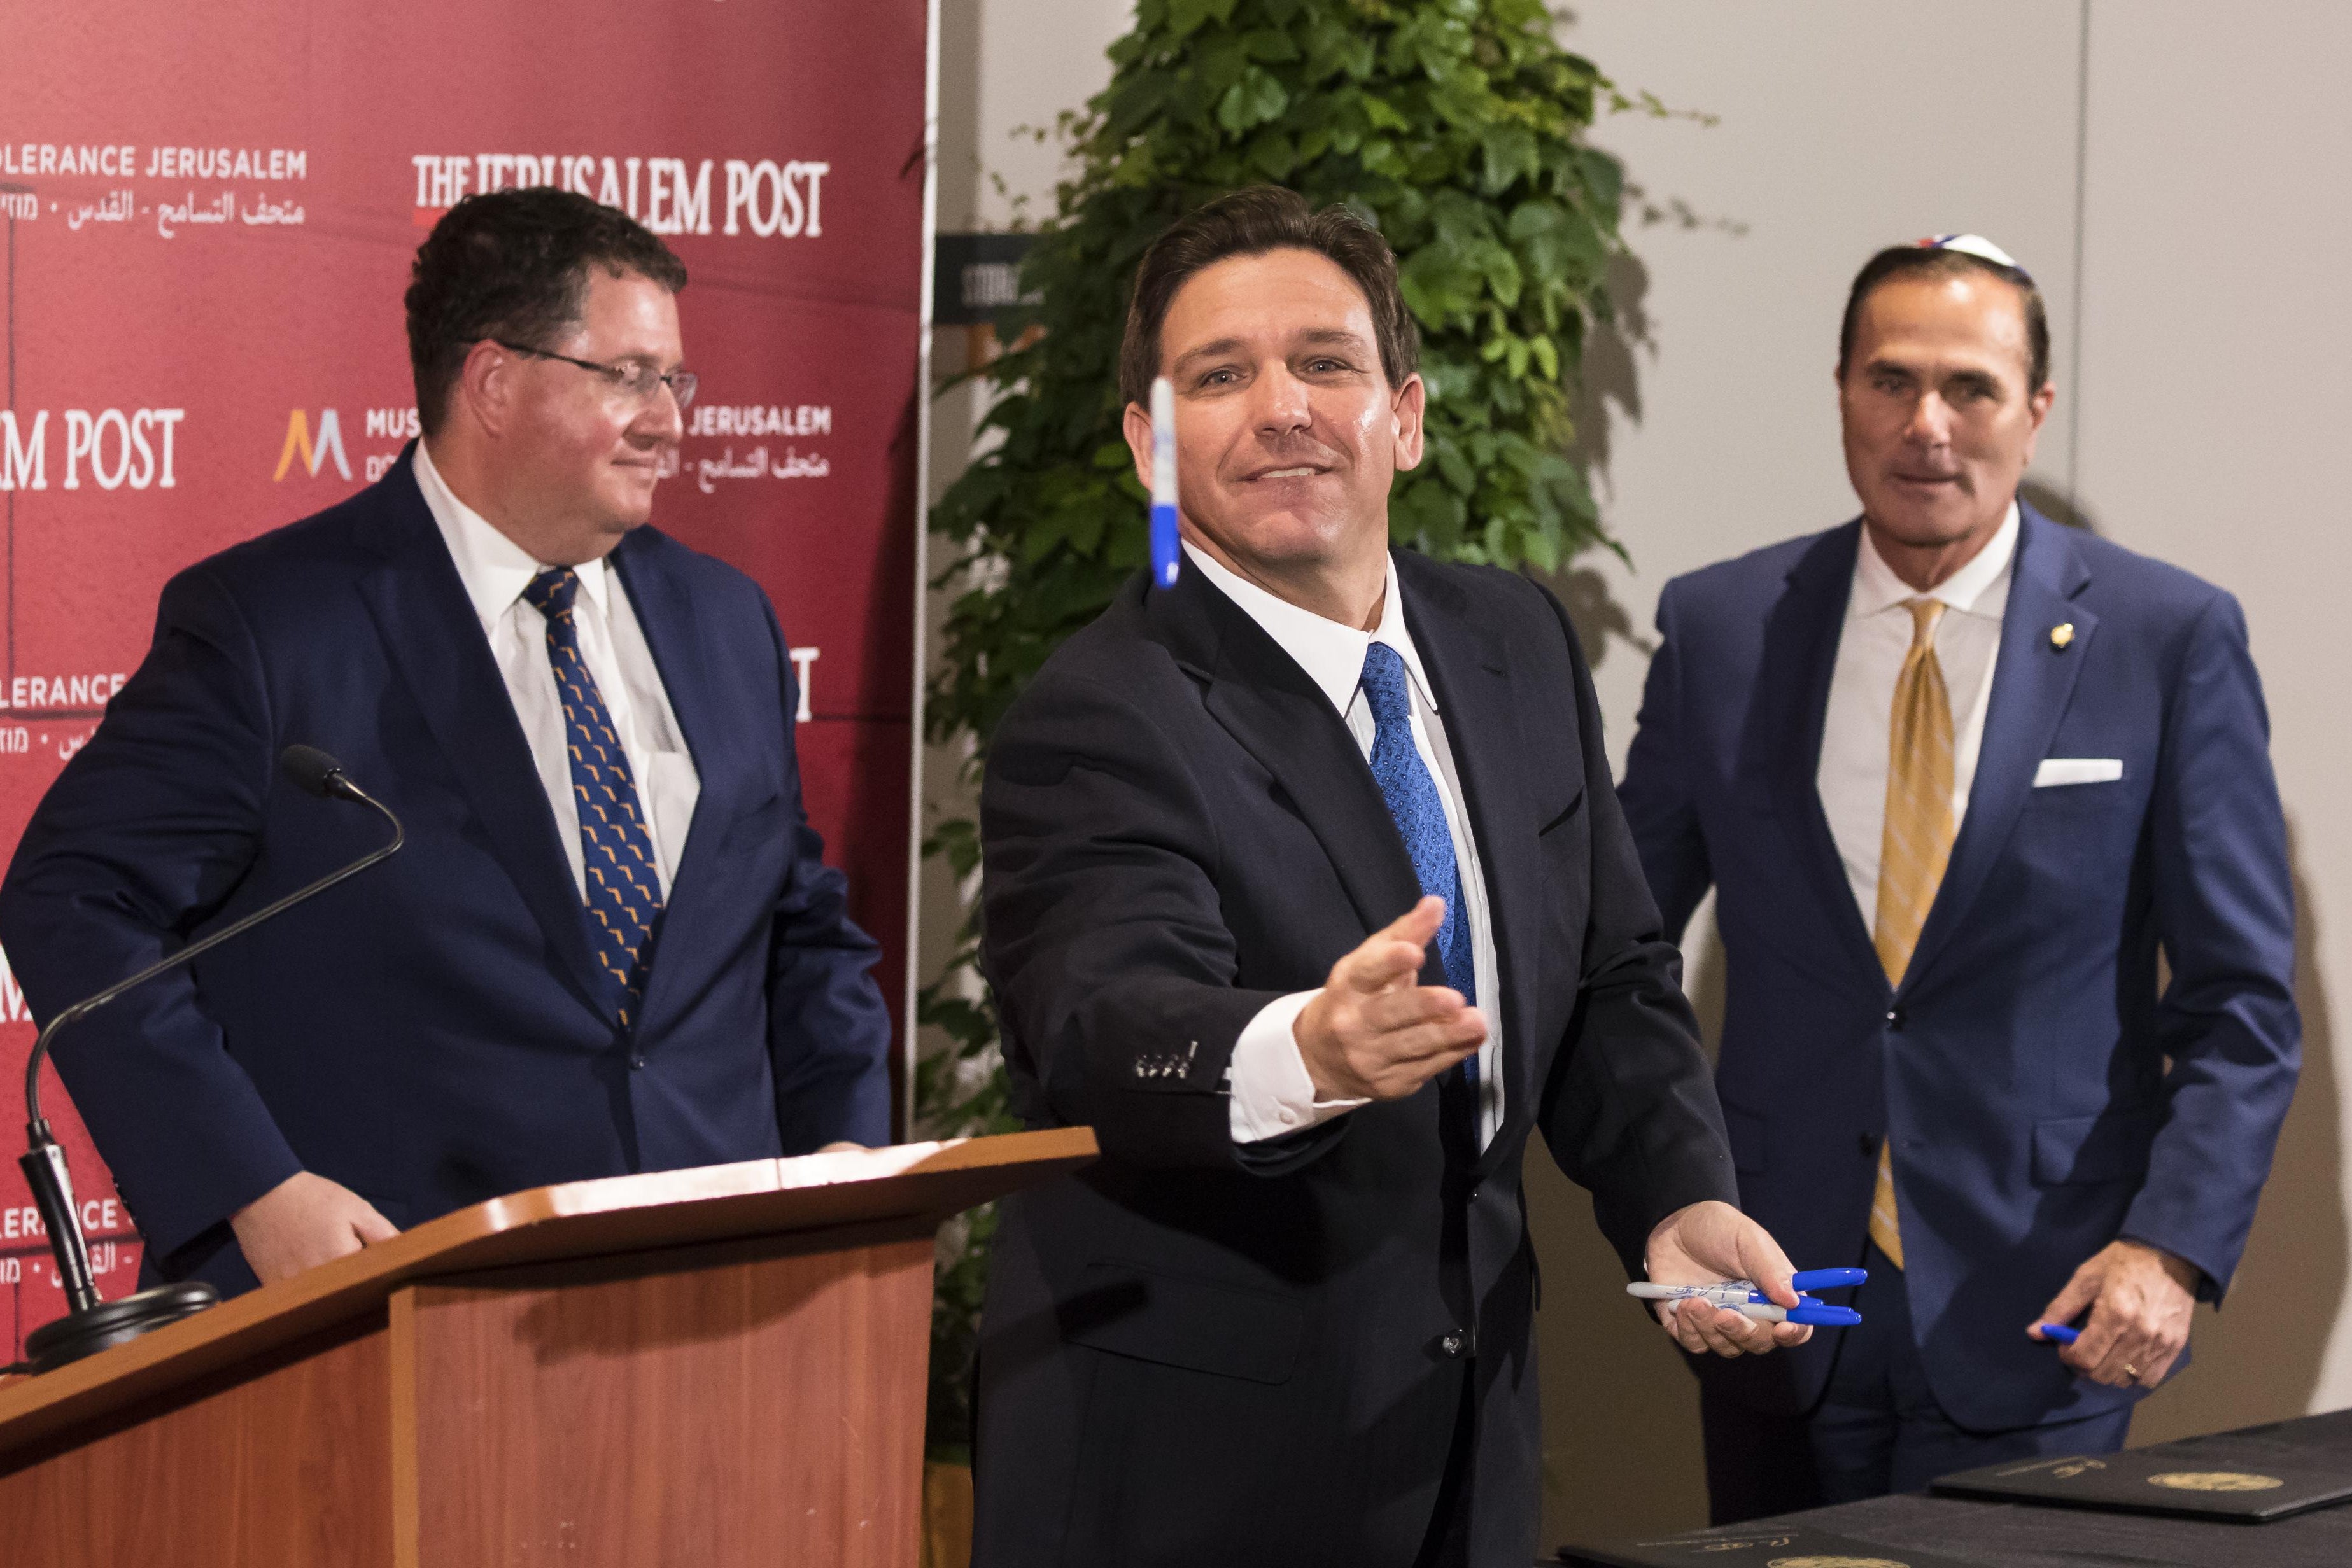 Ron DeSantis stands next to a podium and throws a blue Sharpie with one hand. In his other hand, he holds several more blue Sharpies. Two men stand in the background.